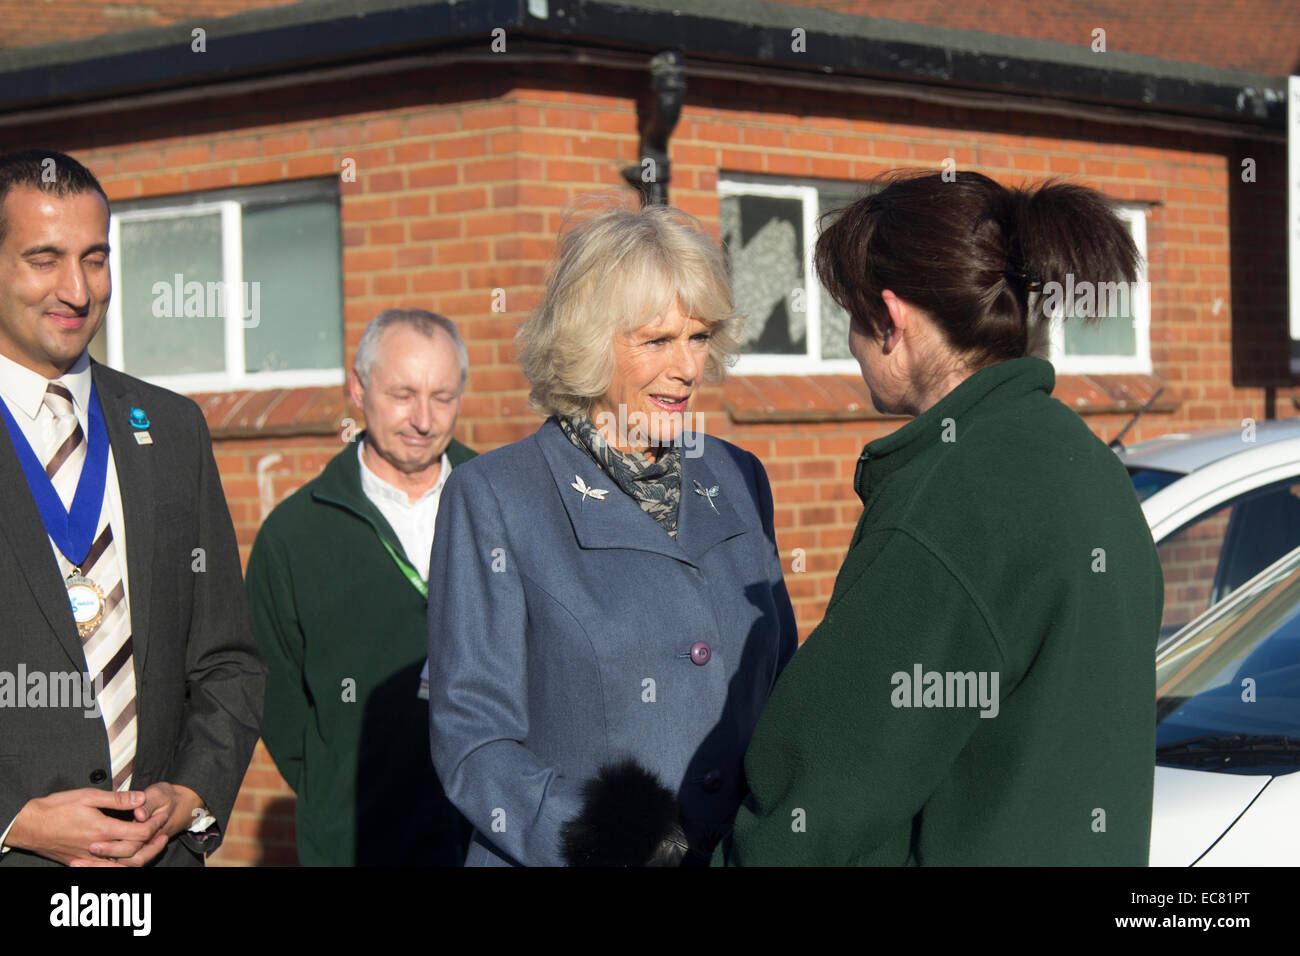 St. Albans, Hertfordshire, UK. 10th Dec, 2014. Camilla, Duchess of Cornwall, undertakes a pre-christmas visit to St. Albans in Hertfordshire. She visited the Jubilee Centre and met staff who organise ‘Meals on Wheels’. The Jubilee Centre provides a daily lunch club for the over 60s as well as daily coffee club for all ages. Credit:  Tove Larsen/Alamy Live News Stock Photo